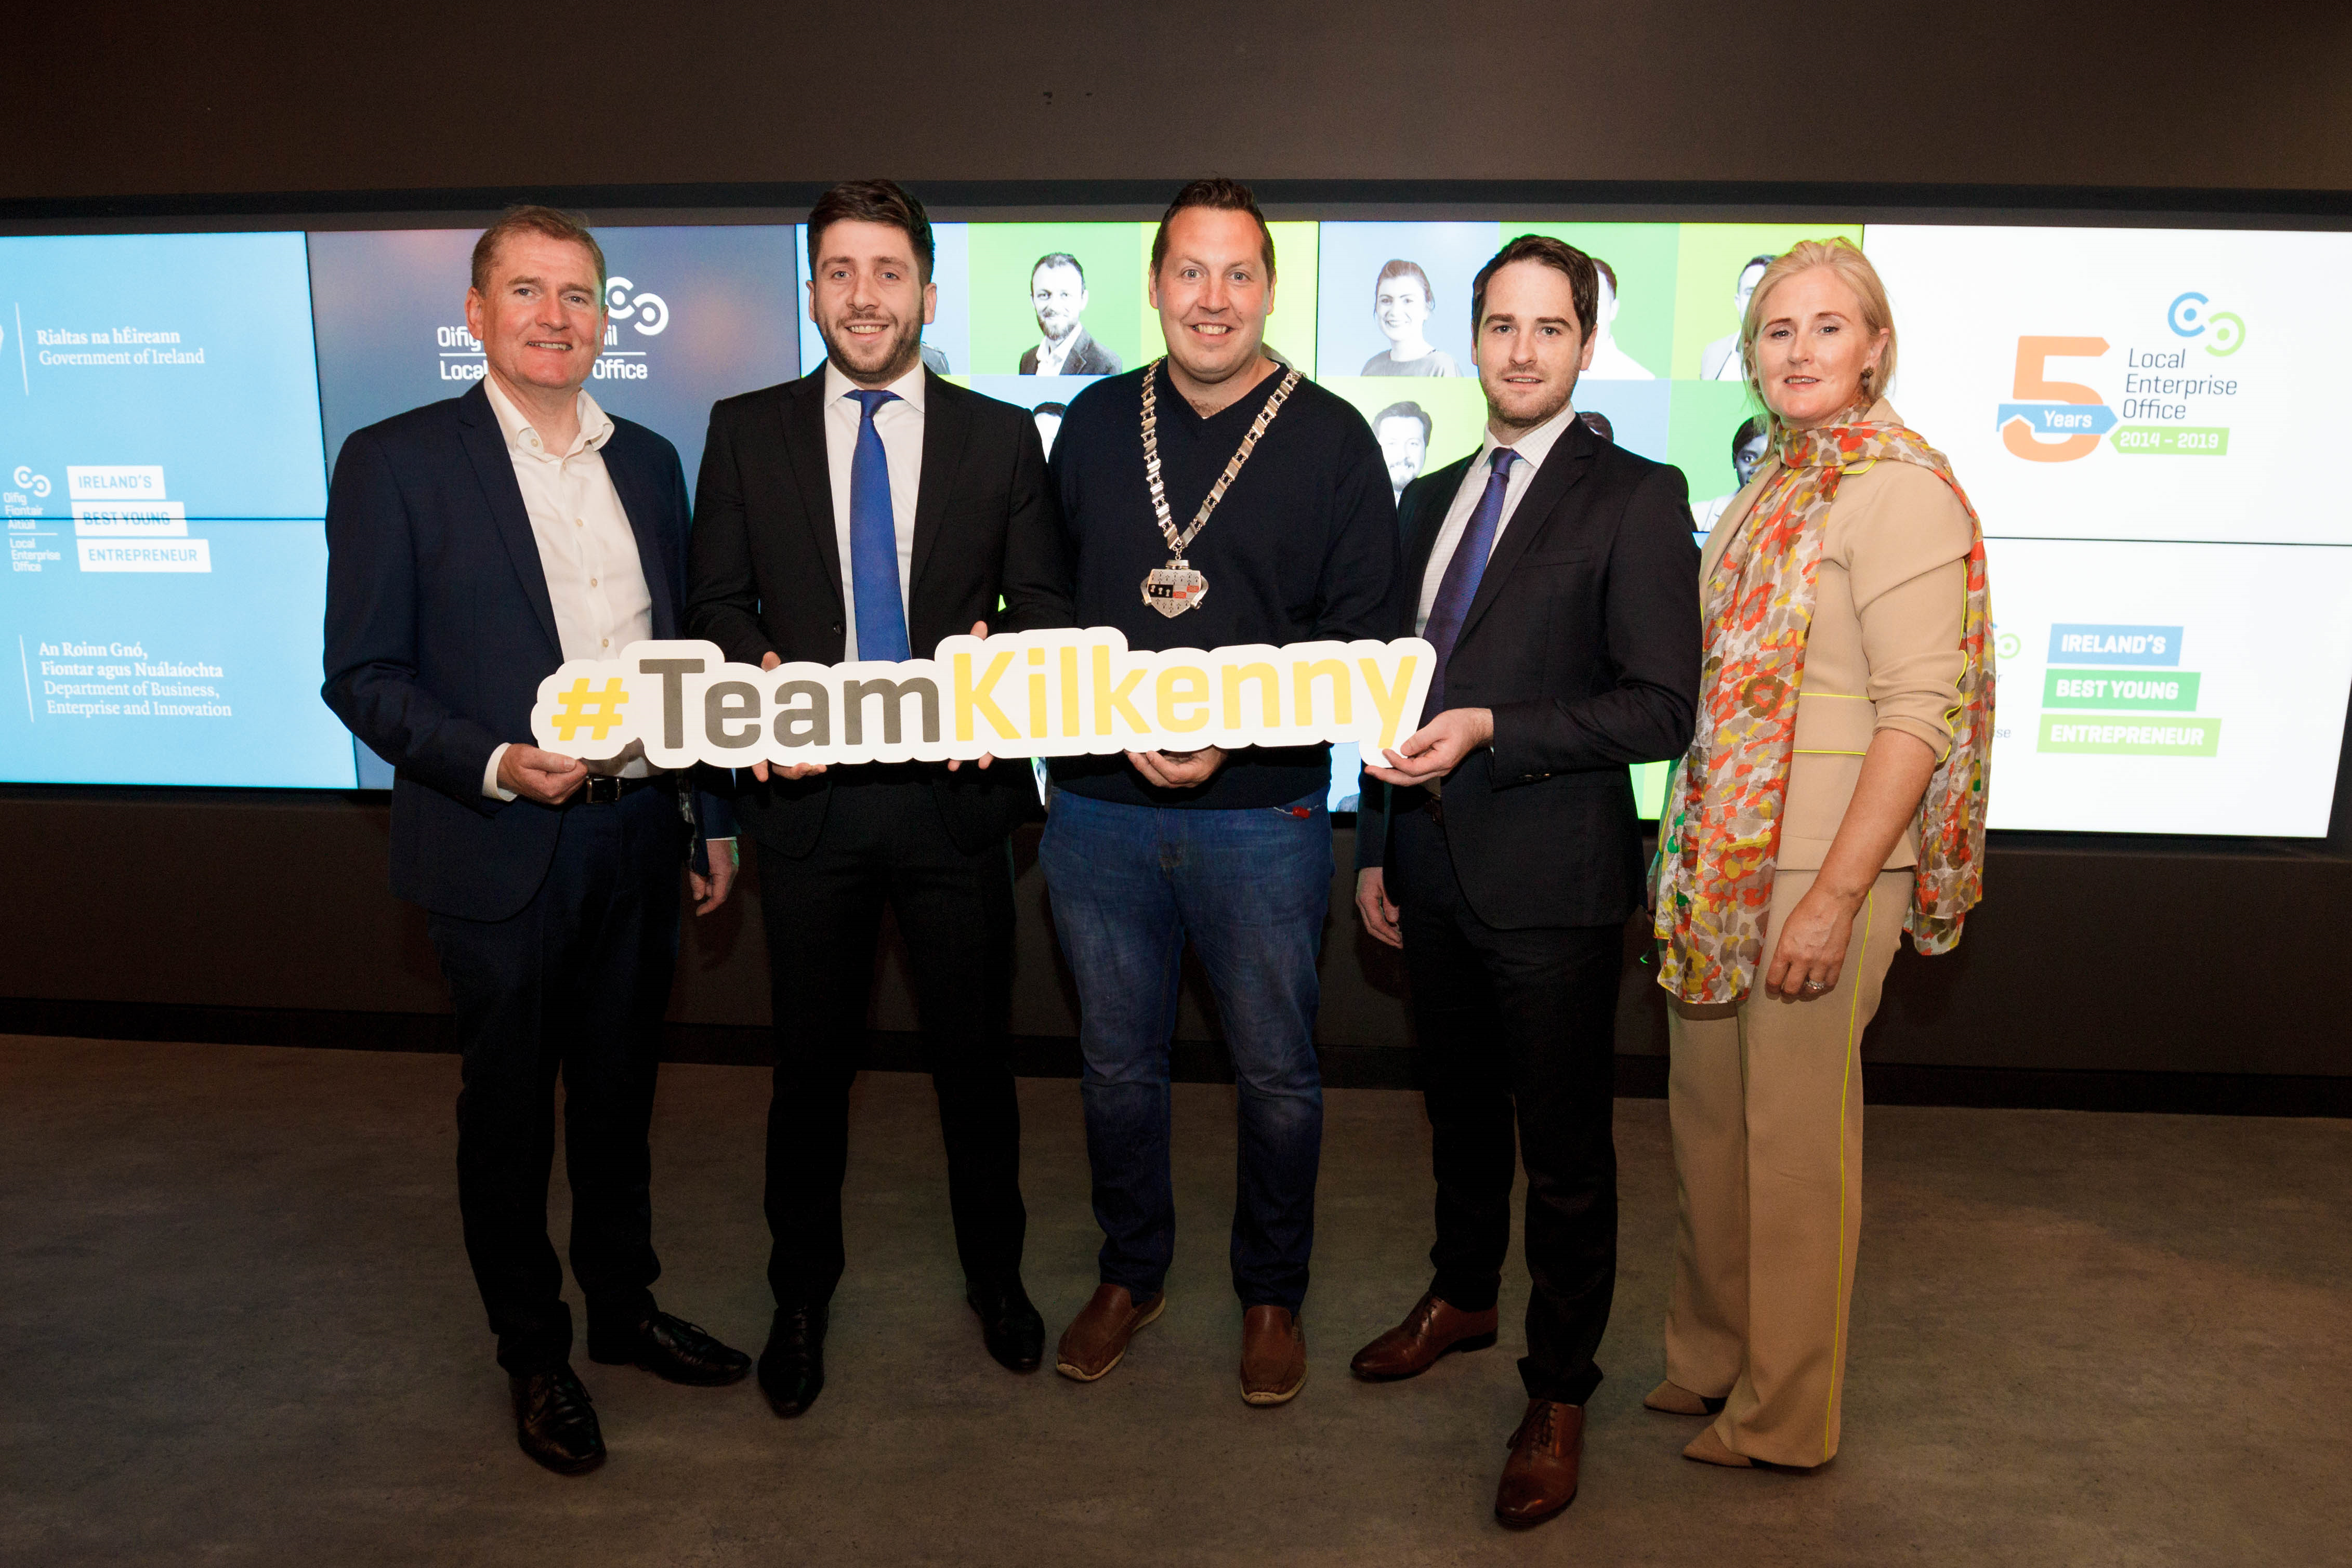 National Final of Ireland’s Best Young Entrepreneur